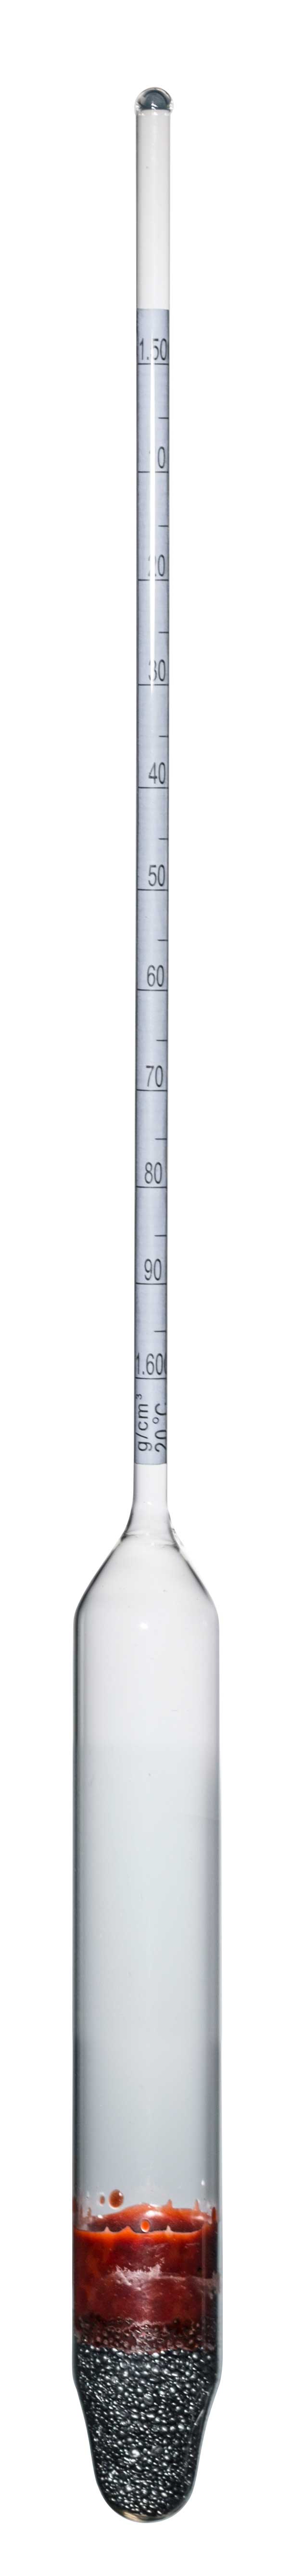 Precision hydrometers, total range 0,100g/cm3, without thermometer, length 300mm